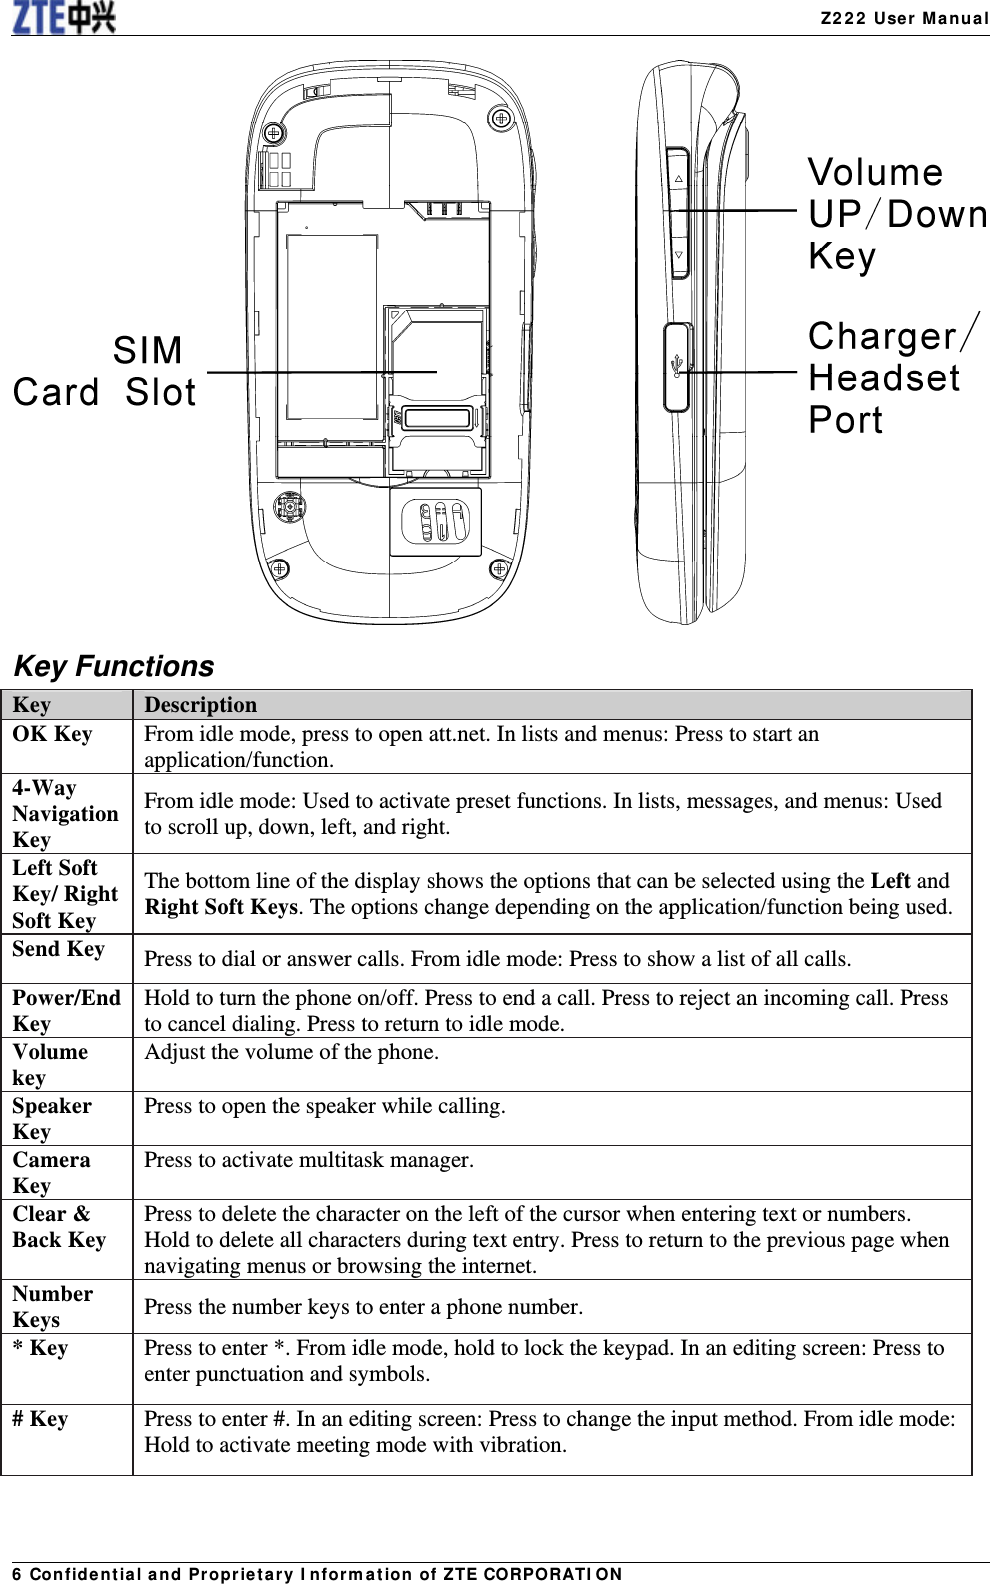   Z222 User Manual6 Confidential and Proprietary Information of ZTE CORPORATION Key Functions Key   Description  OK Key    From idle mode, press to open att.net. In lists and menus: Press to start an application/function. 4-Way Navigation Key  From idle mode: Used to activate preset functions. In lists, messages, and menus: Used to scroll up, down, left, and right.   Left Soft Key/ Right Soft Key   The bottom line of the display shows the options that can be selected using the Left and Right Soft Keys. The options change depending on the application/function being used. Send Key    Press to dial or answer calls. From idle mode: Press to show a list of all calls.   Power/End Key   Hold to turn the phone on/off. Press to end a call. Press to reject an incoming call. Press to cancel dialing. Press to return to idle mode. Volume key  Adjust the volume of the phone. Speaker Key  Press to open the speaker while calling. Camera Key   Press to activate multitask manager.   Clear &amp; Back Key    Press to delete the character on the left of the cursor when entering text or numbers. Hold to delete all characters during text entry. Press to return to the previous page when navigating menus or browsing the internet. Number Keys   Press the number keys to enter a phone number.   * Key    Press to enter *. From idle mode, hold to lock the keypad. In an editing screen: Press to enter punctuation and symbols.   # Key    Press to enter #. In an editing screen: Press to change the input method. From idle mode: Hold to activate meeting mode with vibration.    